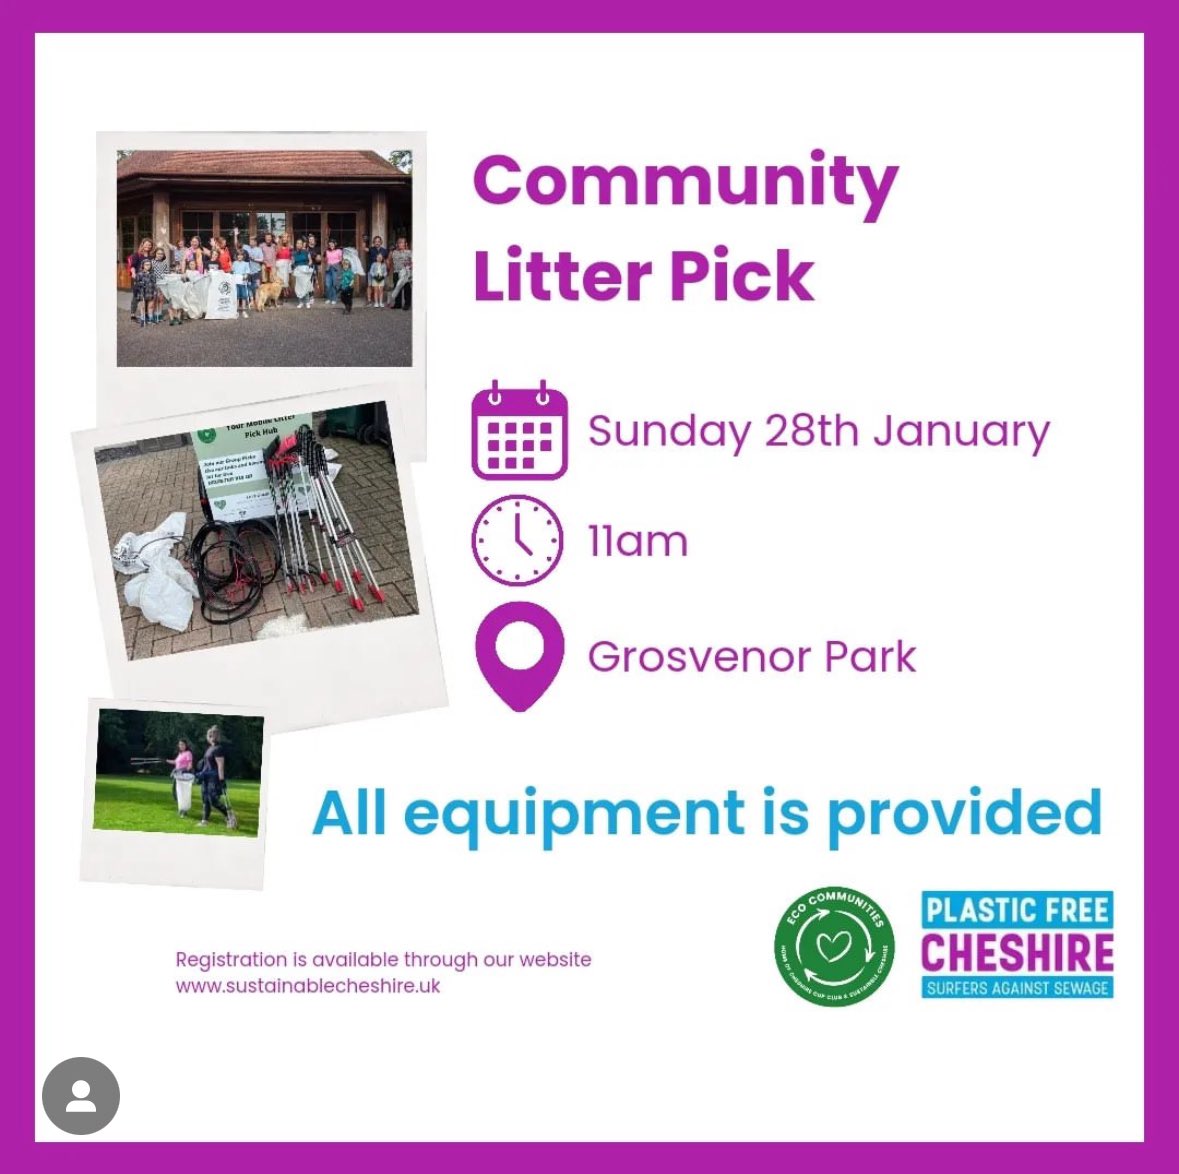 We had a great time litter picking today! The Westminster Park Co-op team were fabulous and it was a great contribution to the community. Thank you @ecocommunities_ 💚 #coop #memberpioneer #sustainability #ecocommunities @Bee__Sparkling @ailsacoop